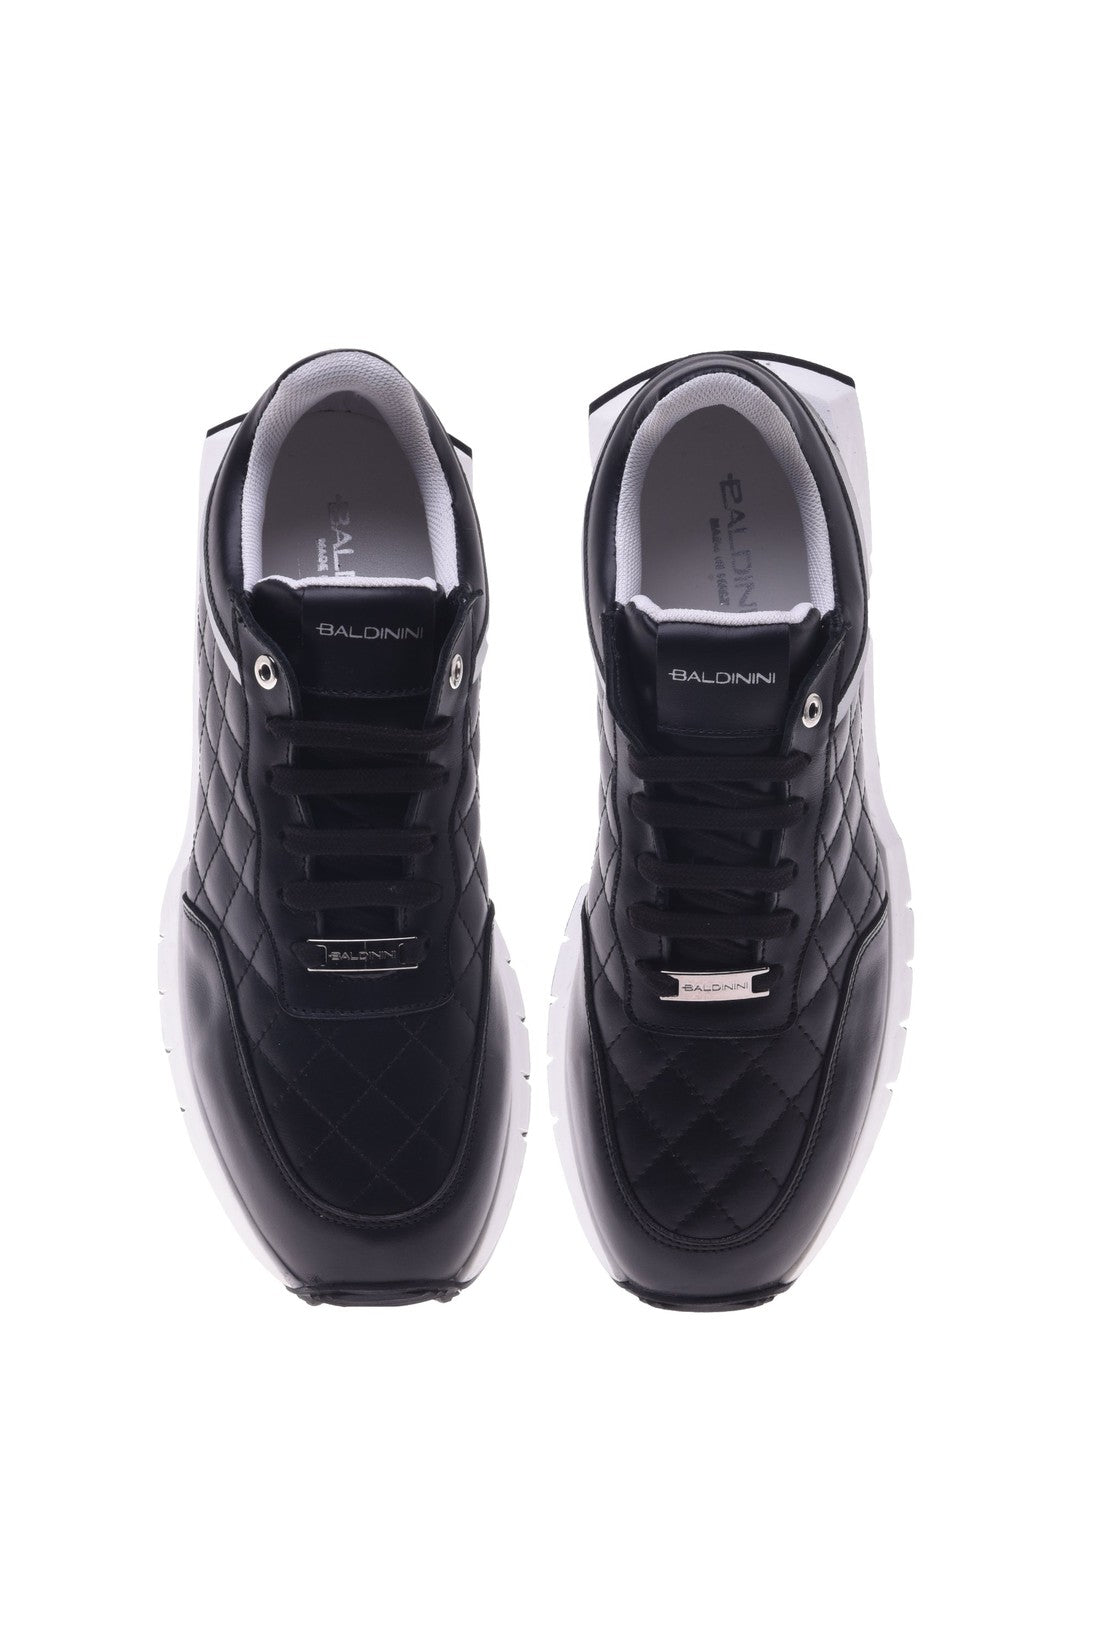 BALDININI-OUTLET-SALE-Sneaker-in-black-quilted-leather-Sneaker-ARCHIVE-COLLECTION-2.jpg